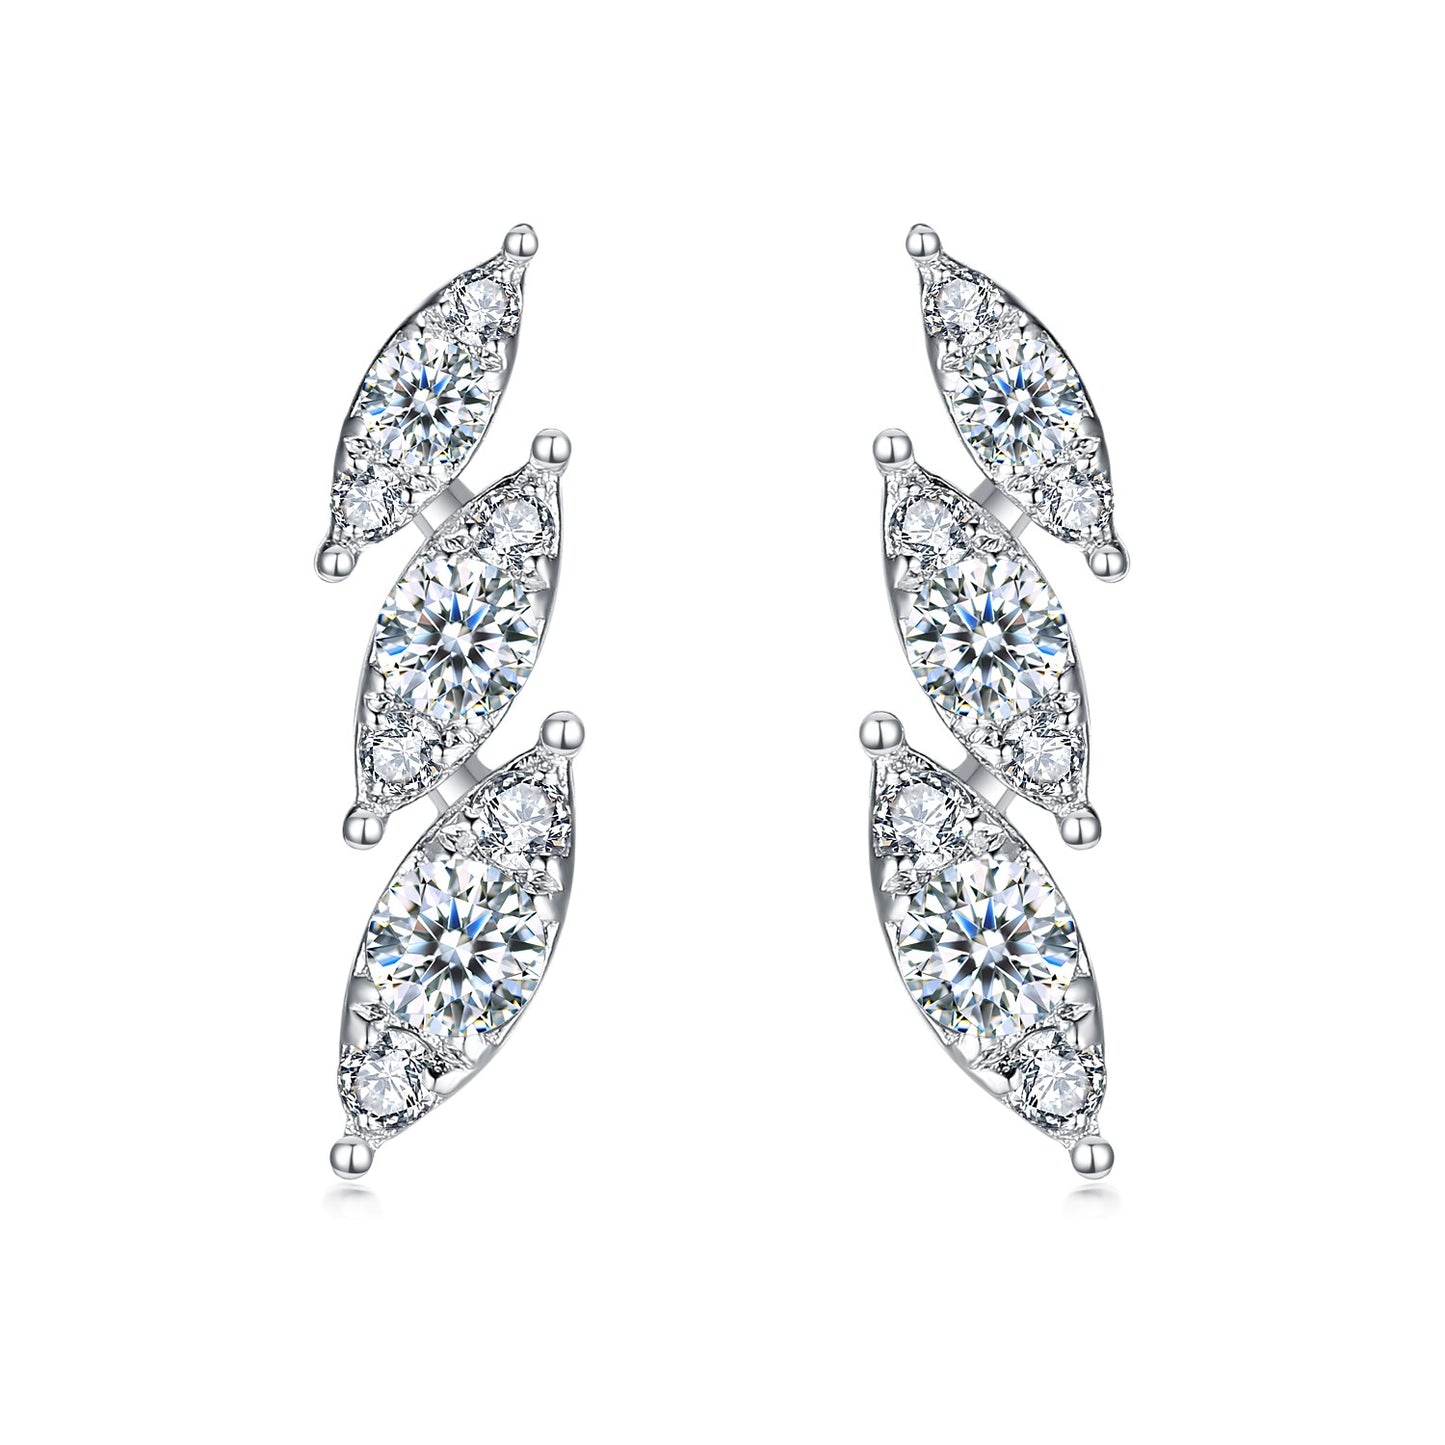 LEGACY--K18 White Gold and Diamonds Earrings